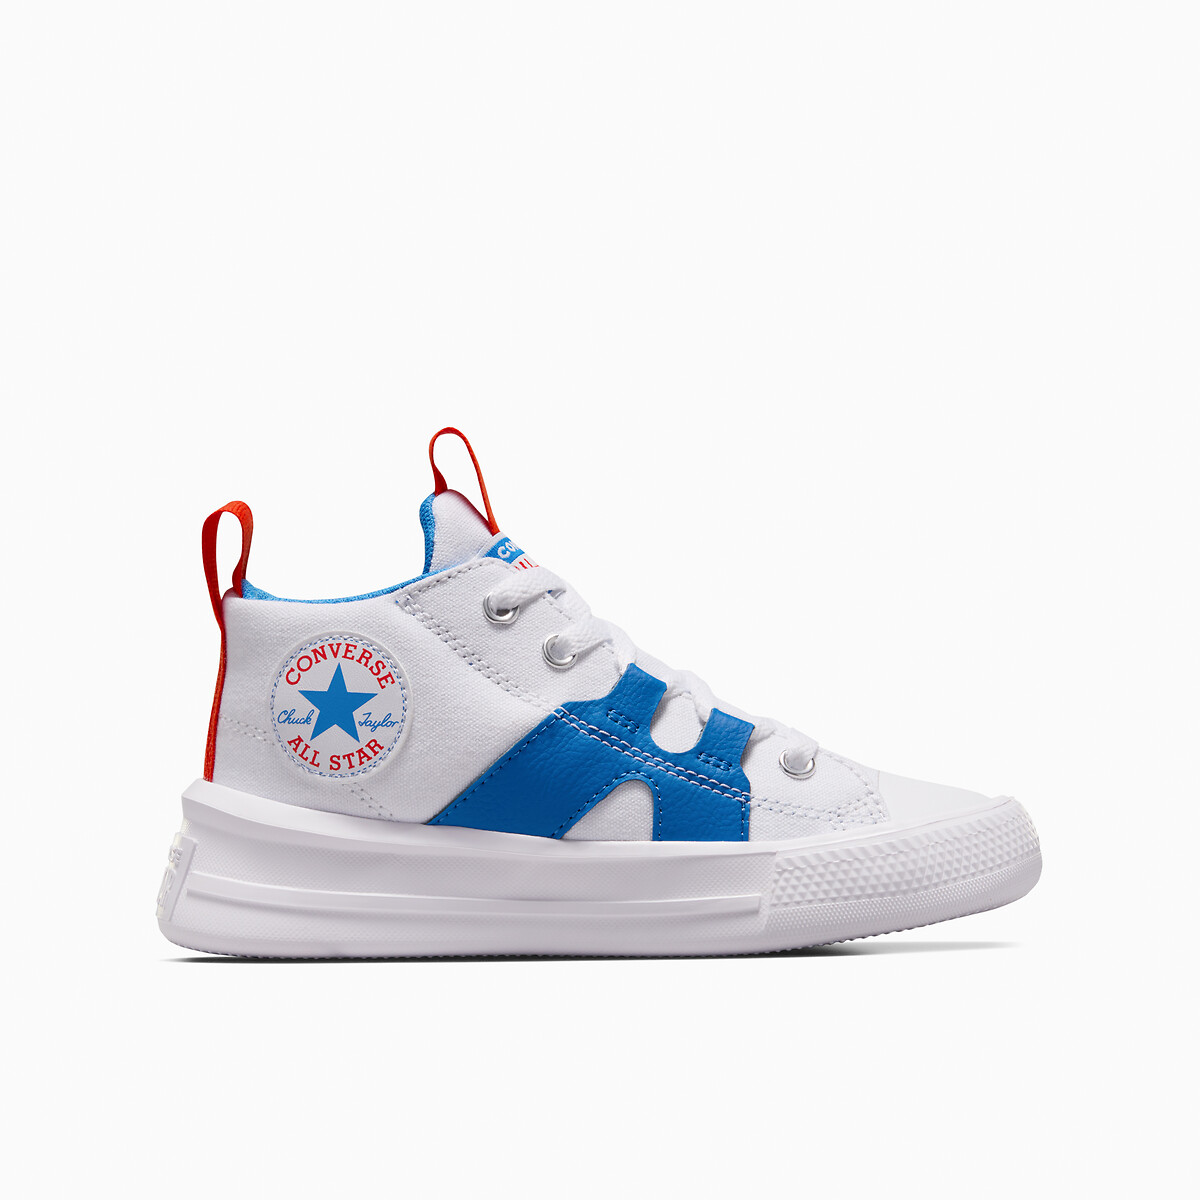 Image of Kids' All Star Ultra Retro Sport High Top Trainers in Canvas